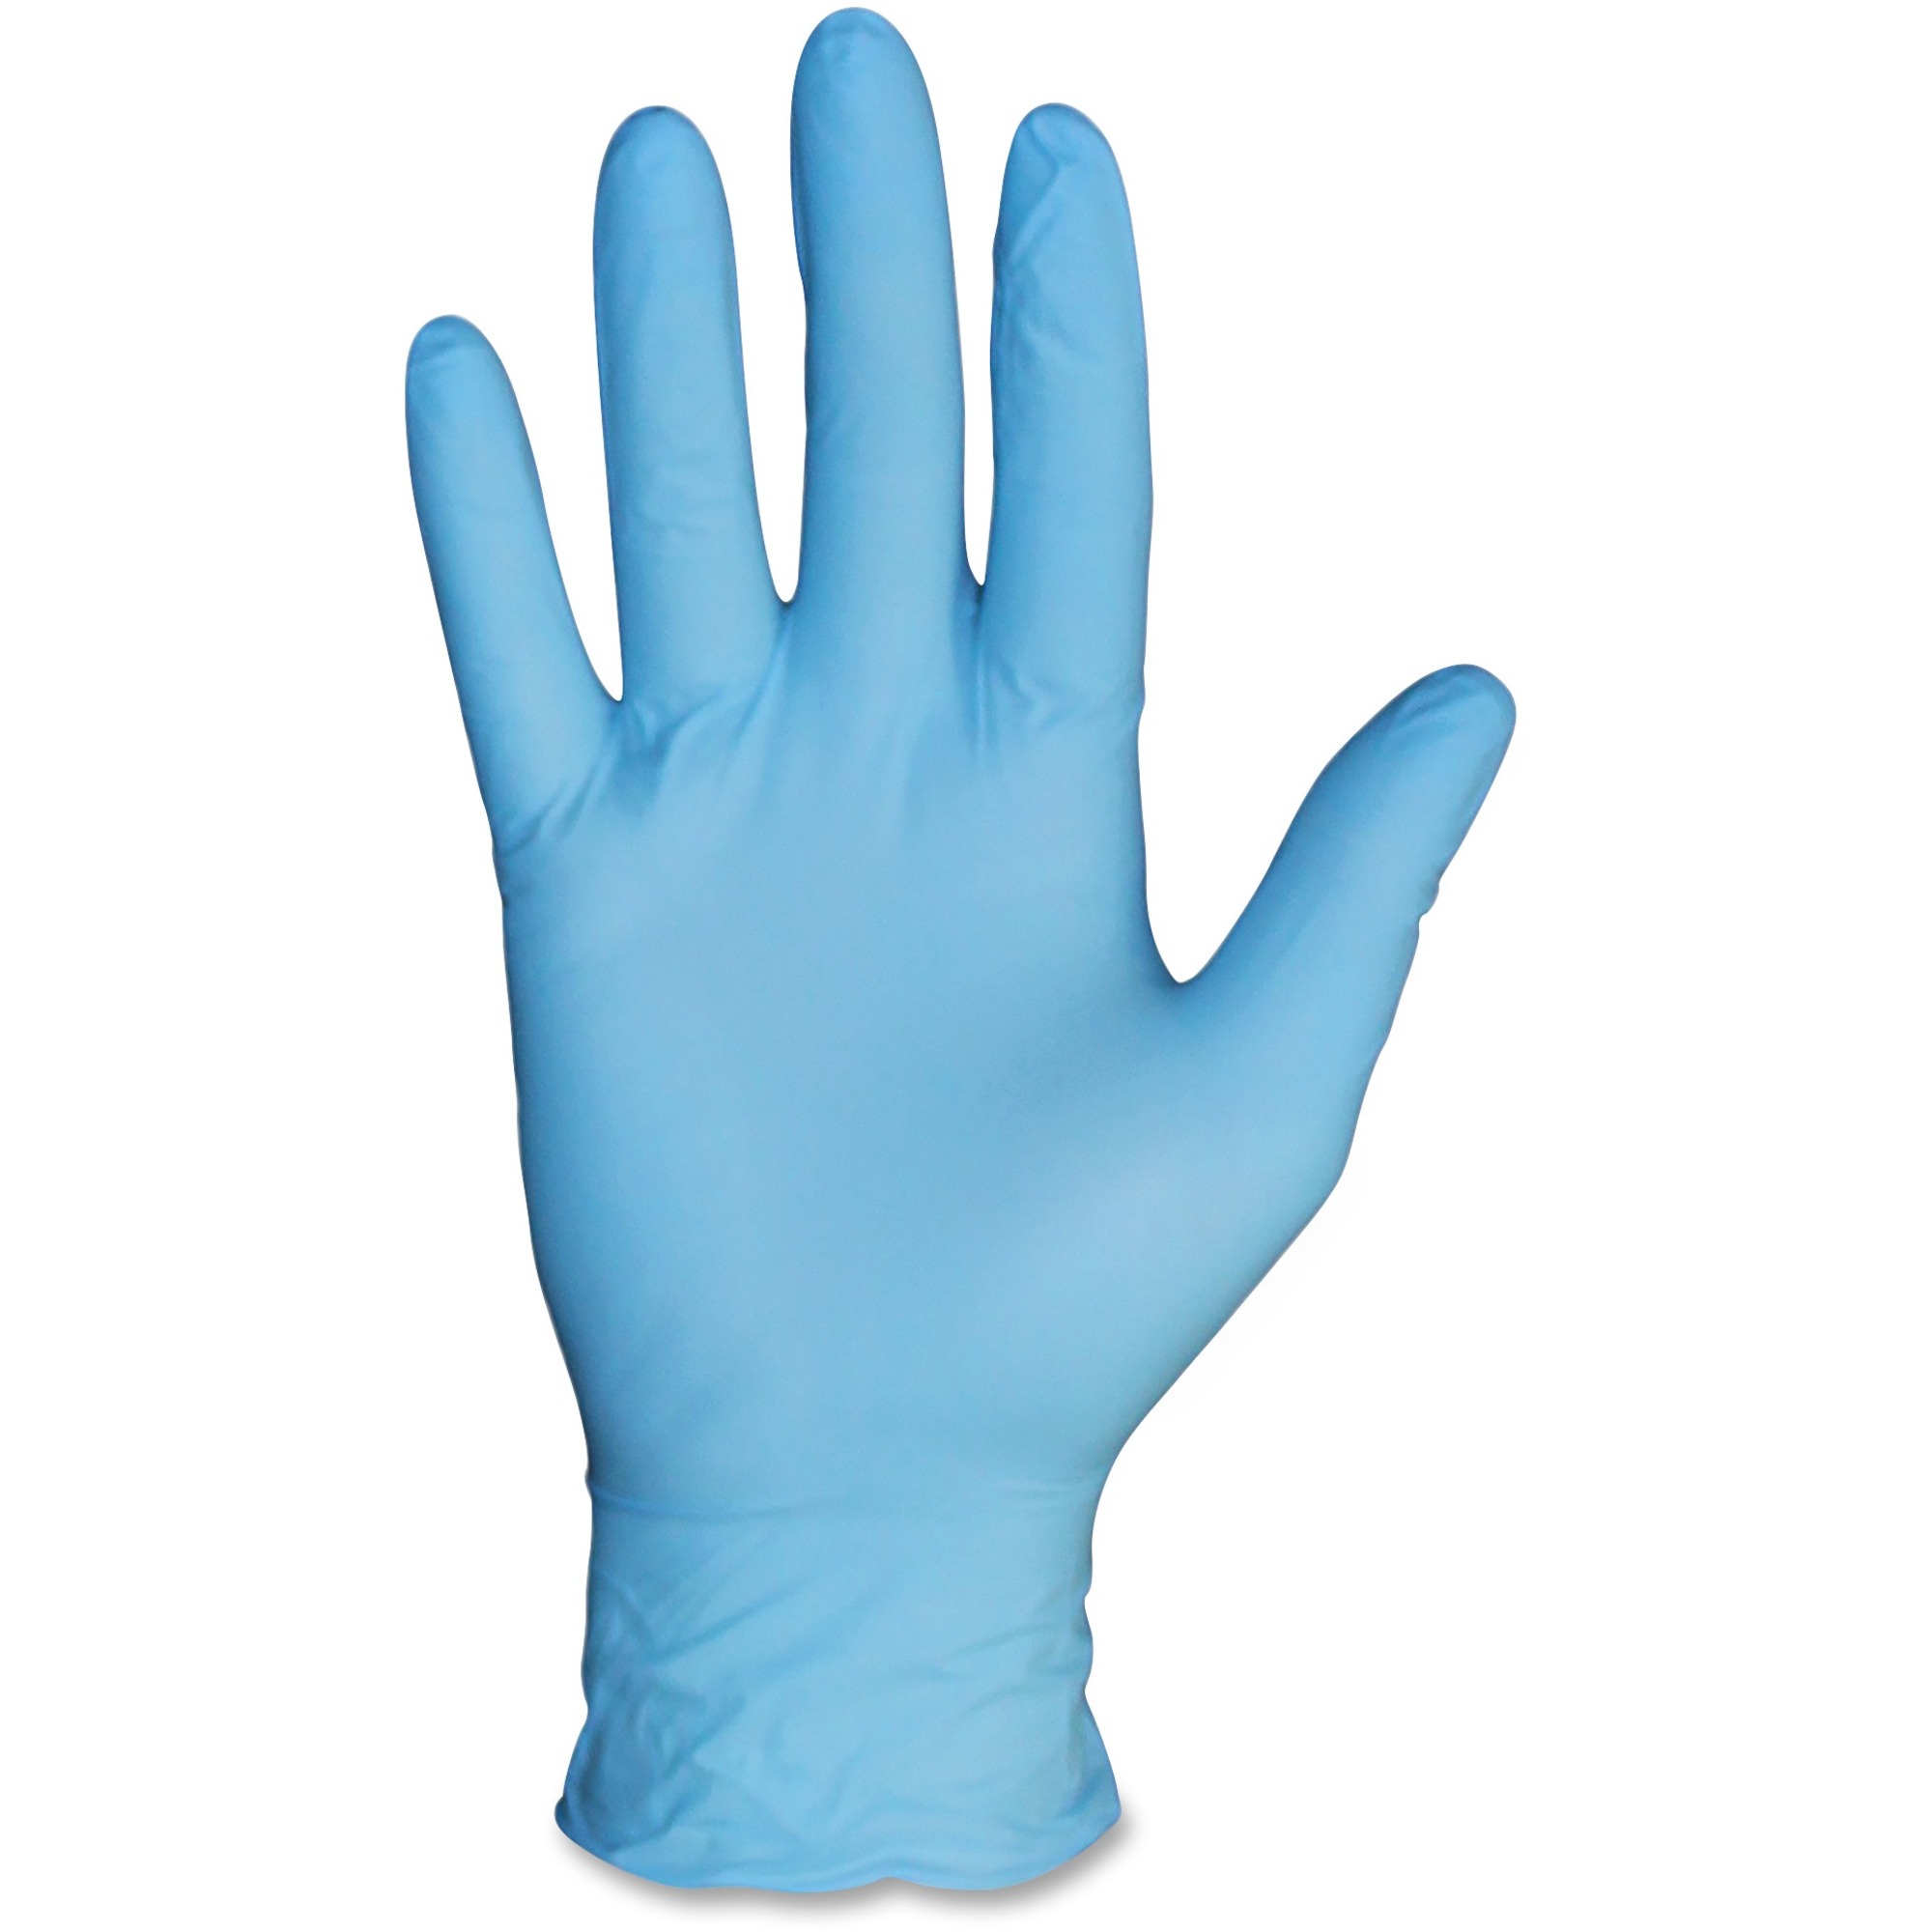 ProGuard General-purpose Disposable Nitrile Gloves - Chemical Protection - Small Size - Nitrile - Blue - Disposable, Powdered, Textured Grip, Beaded Cuff, Puncture Resistant, Ambidextrous - For General Purpose, Chemical, Cleaning, Food, Laboratory Applica